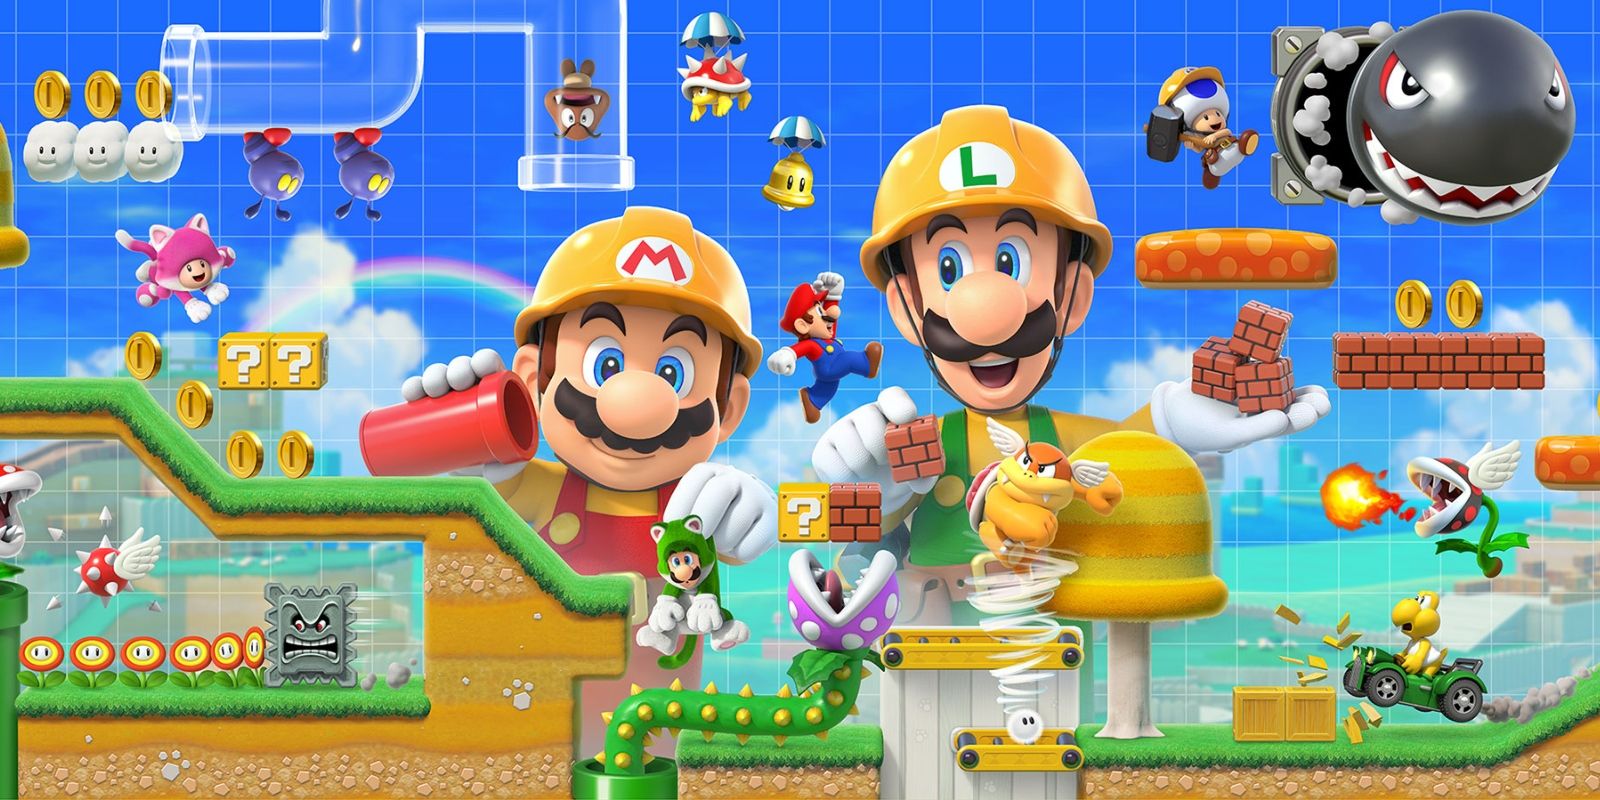 An image of a promo banner for Super Mario Maker 2